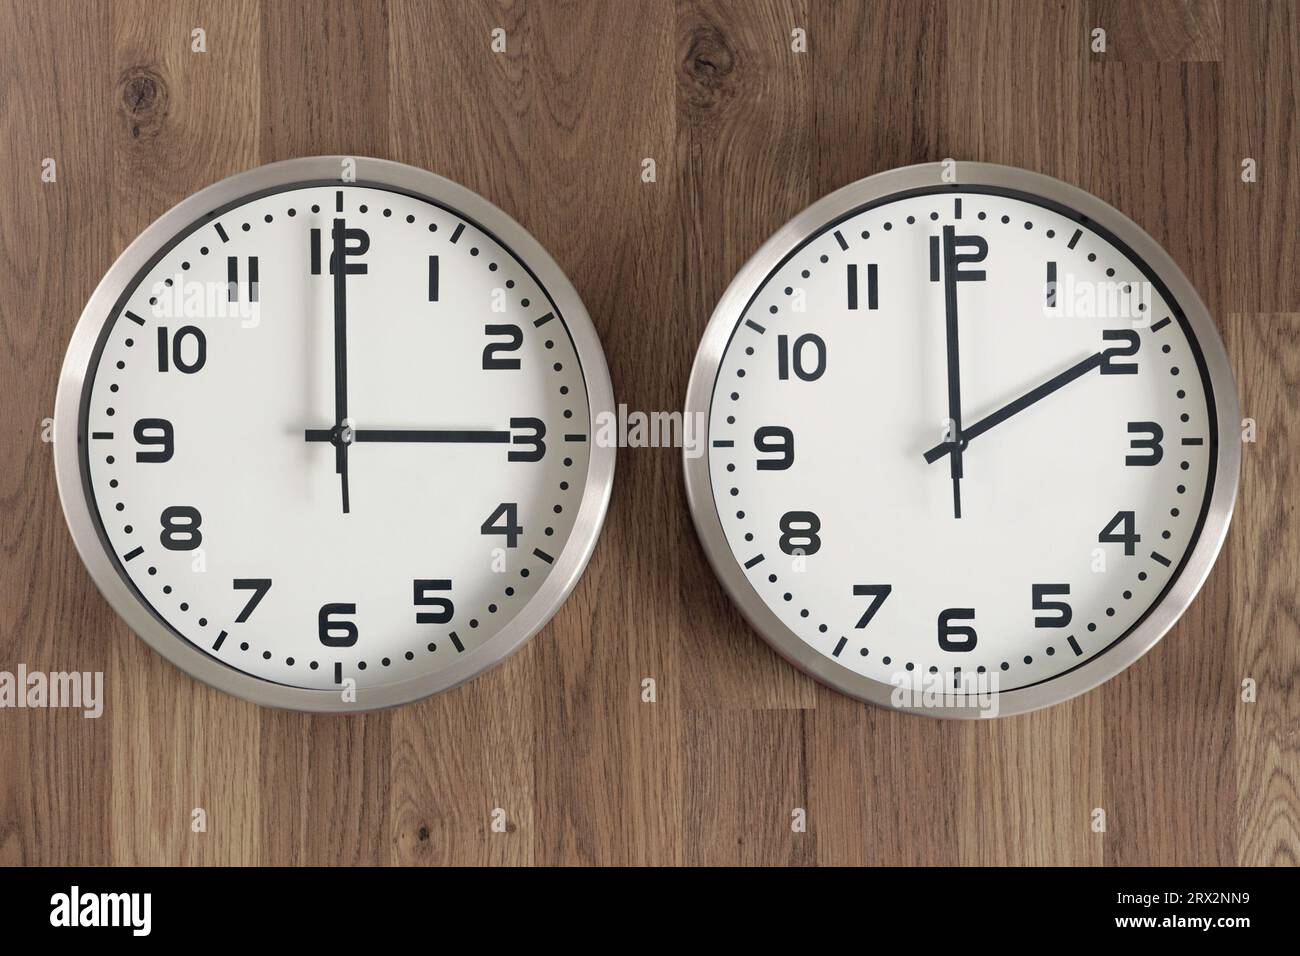 Two clocks, one showing two o'clock, the other showing three o'clock.  Time change symbol. Daylight saving time. Moving the hands forward. Stock Photo